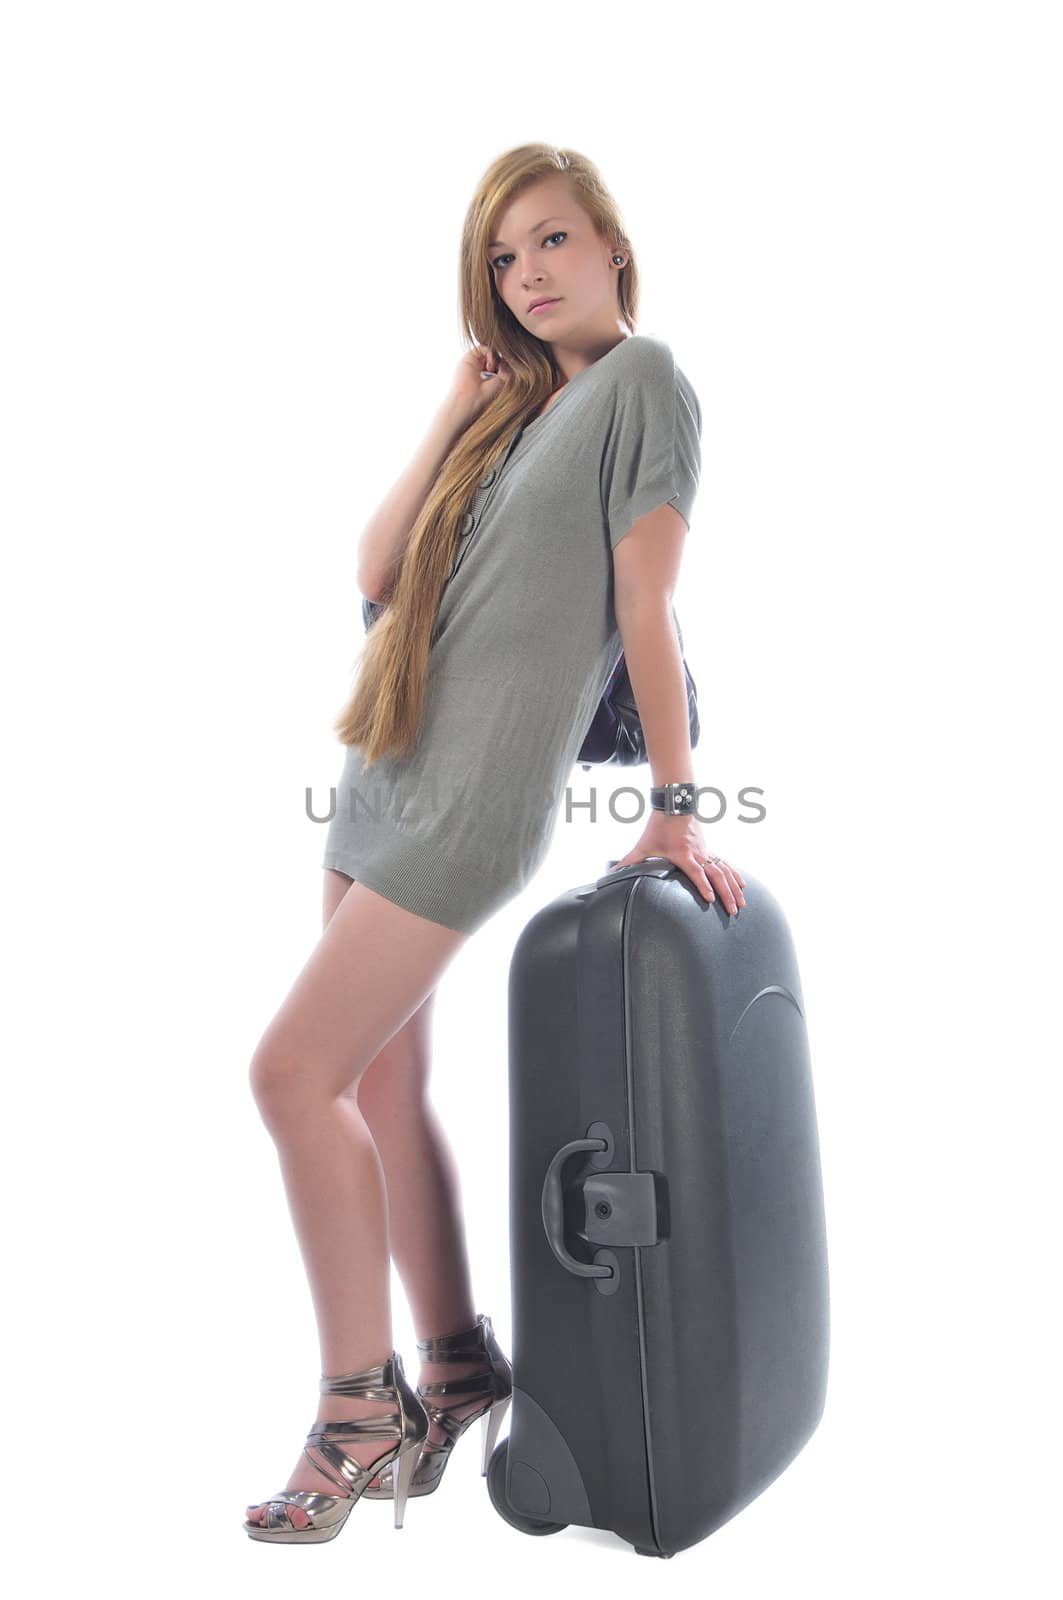 Girl with luggage, ready for travel